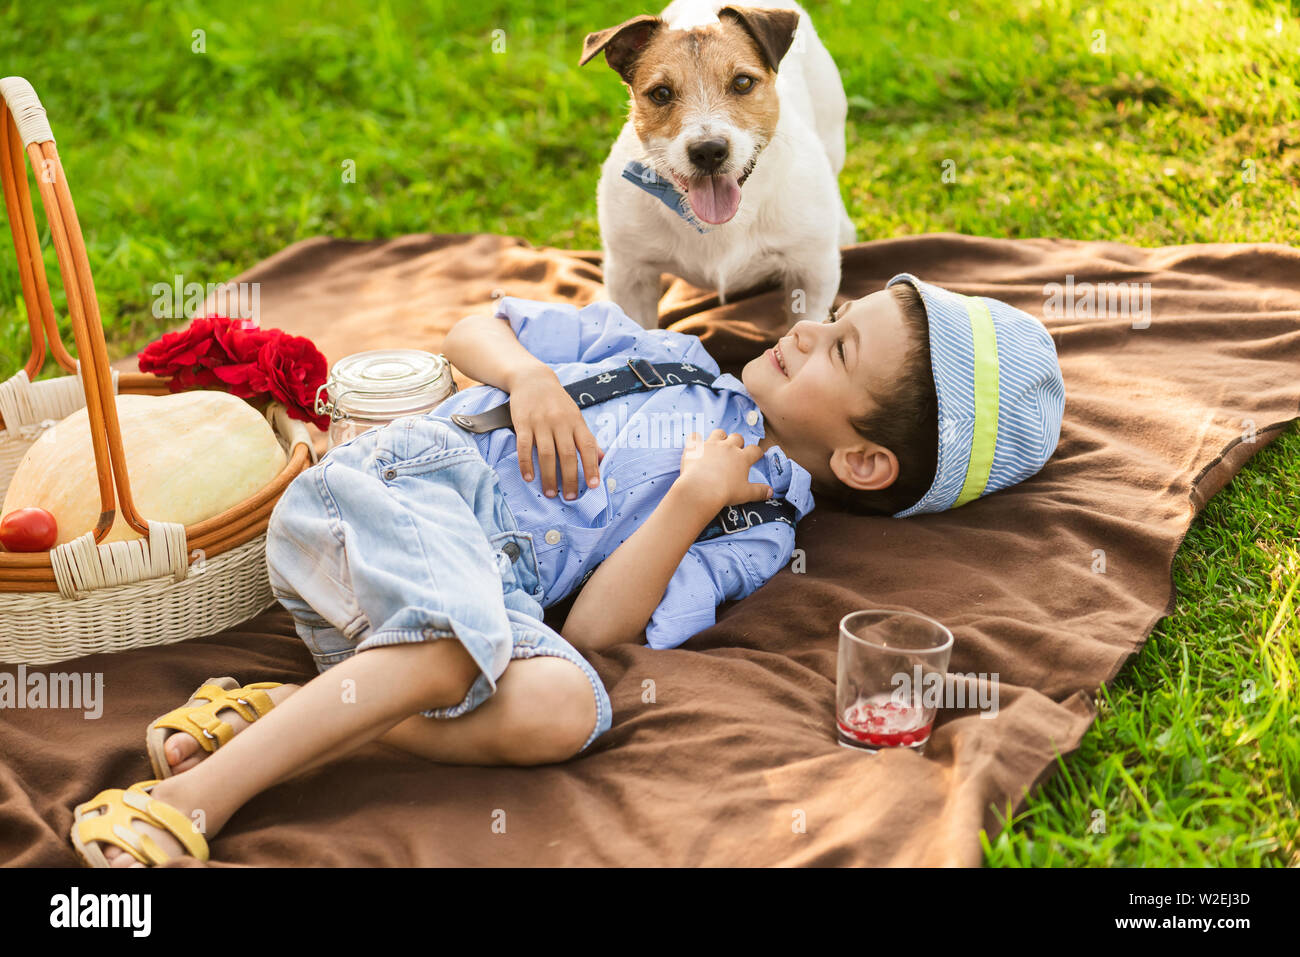 Boy playing with dog at family picnic at green grass lawn Stock Photo